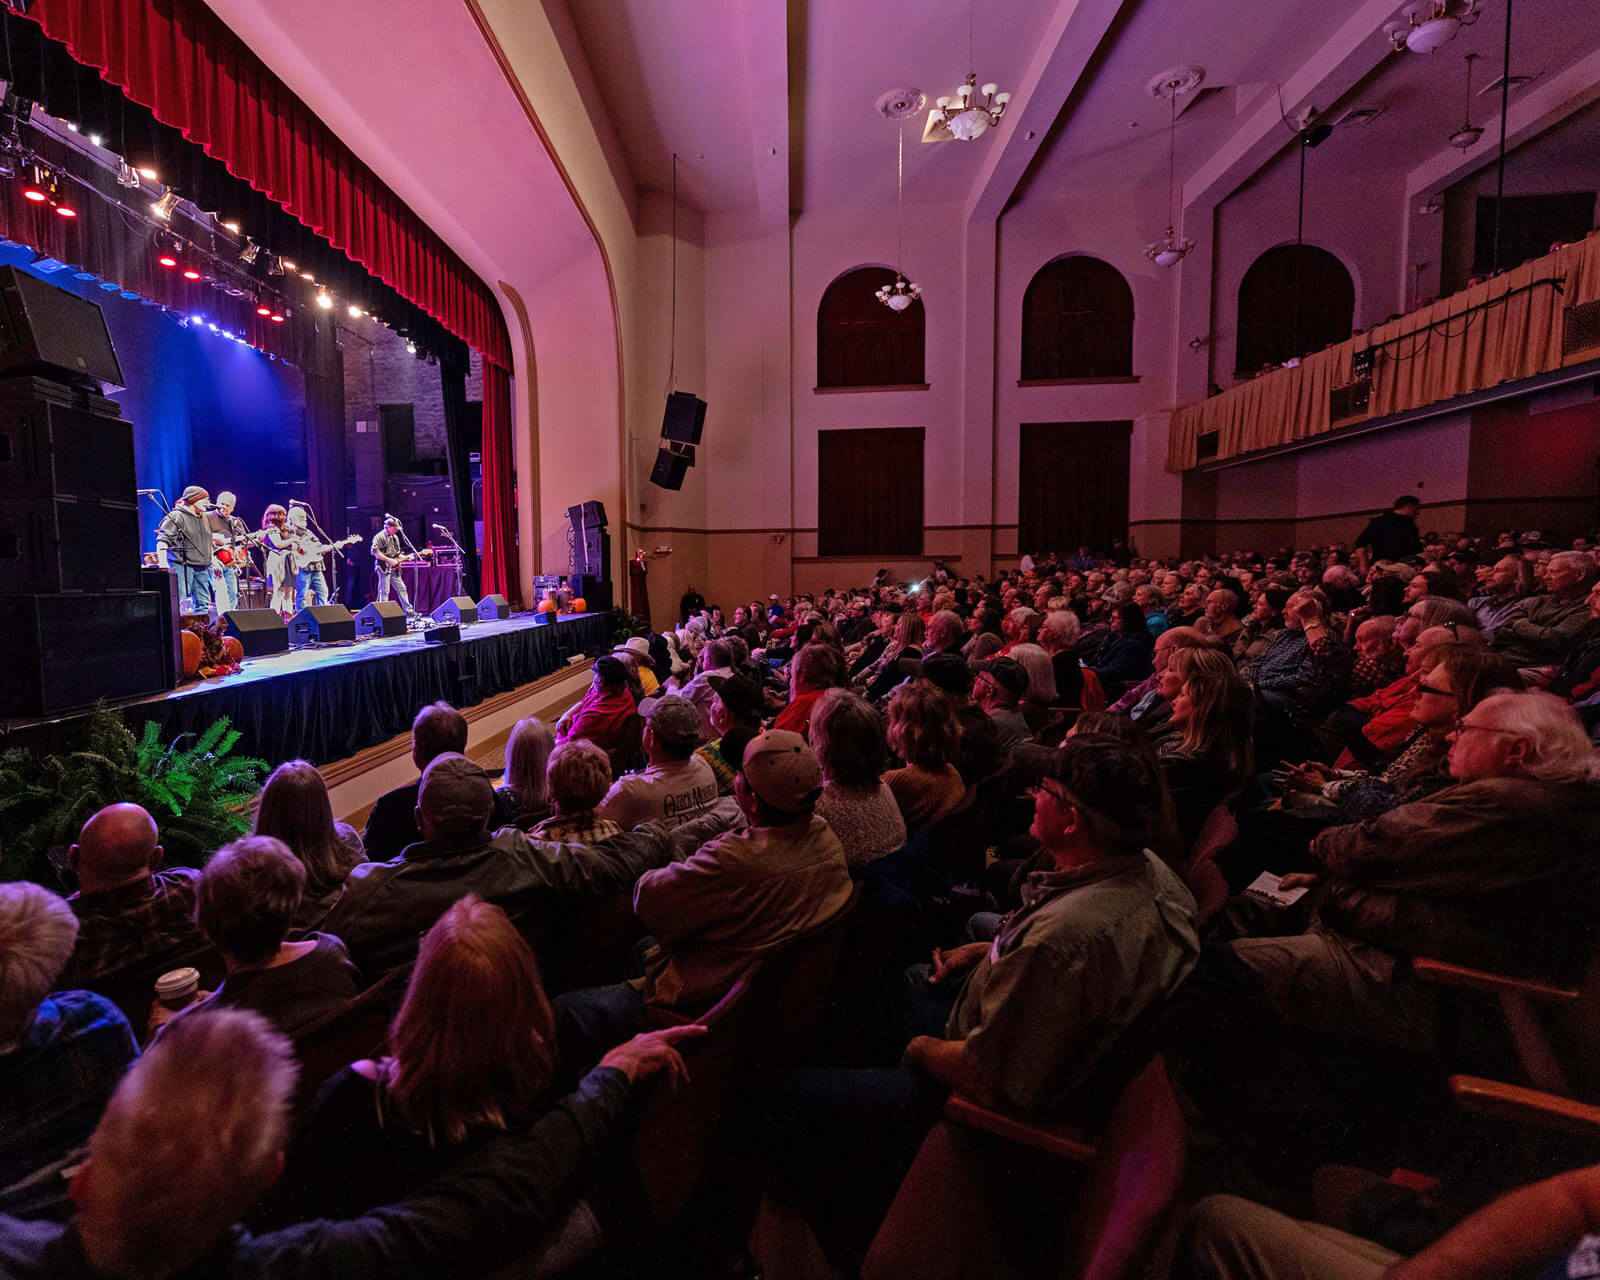 Featured image for “Nearly 100 Years Old, The Aud Remains an Entertainment Hub in Eureka Springs”